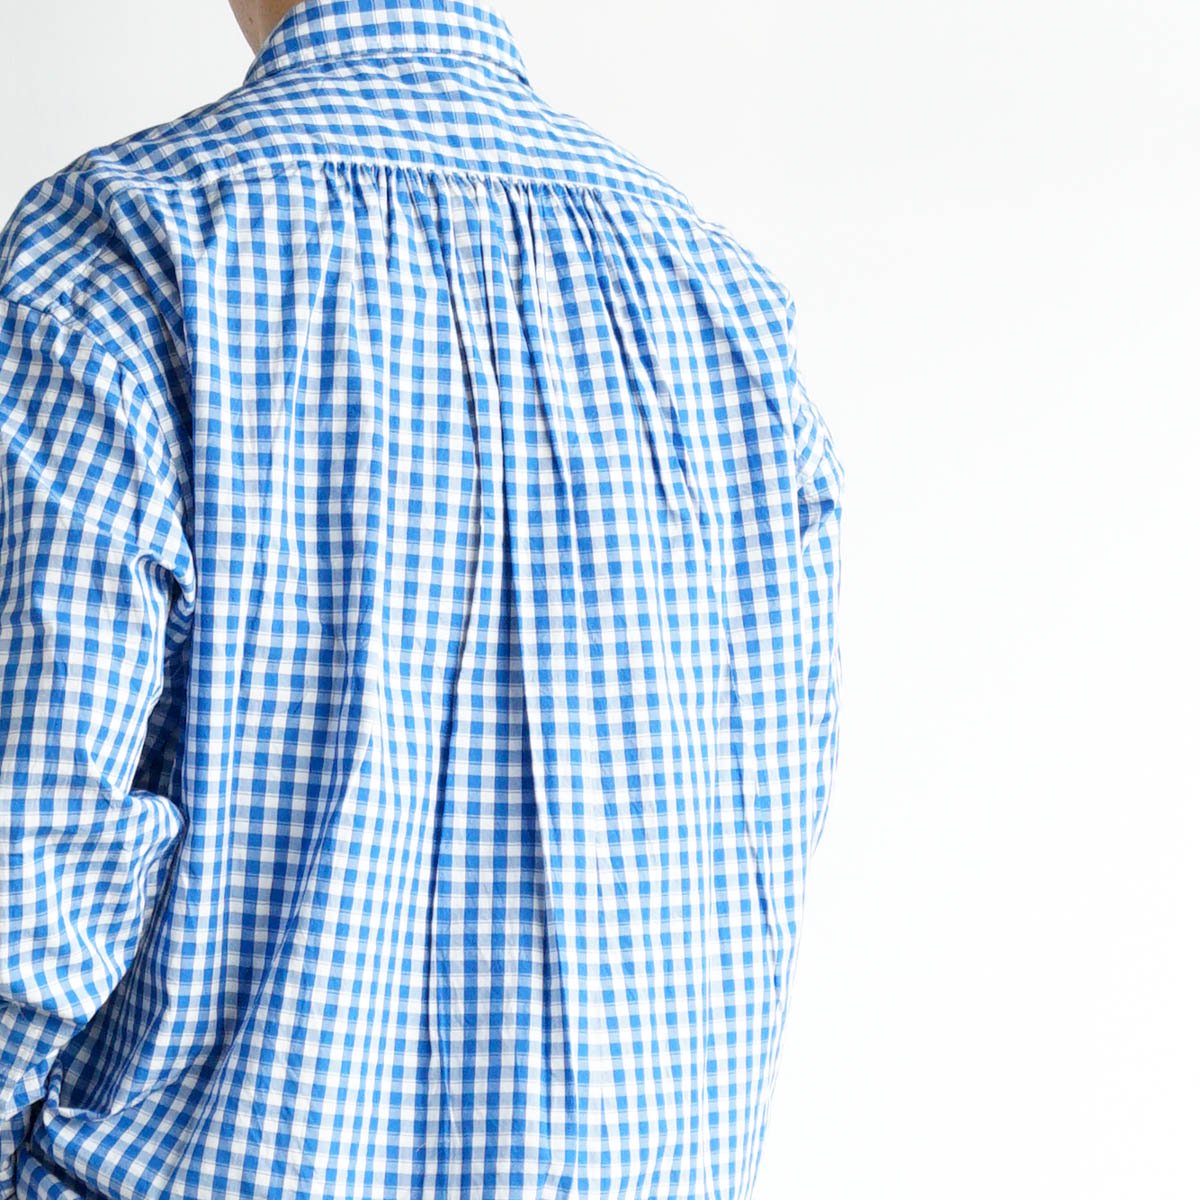 ROLL UP GINGHAM CHECK SHIRT - 香川県高松市のセレクトショップ IHATOVE（イーハトーブ）  A.PRESSE,NEPENTHES,NICENESS,PORTER CLASSIC,WIRROWの通販